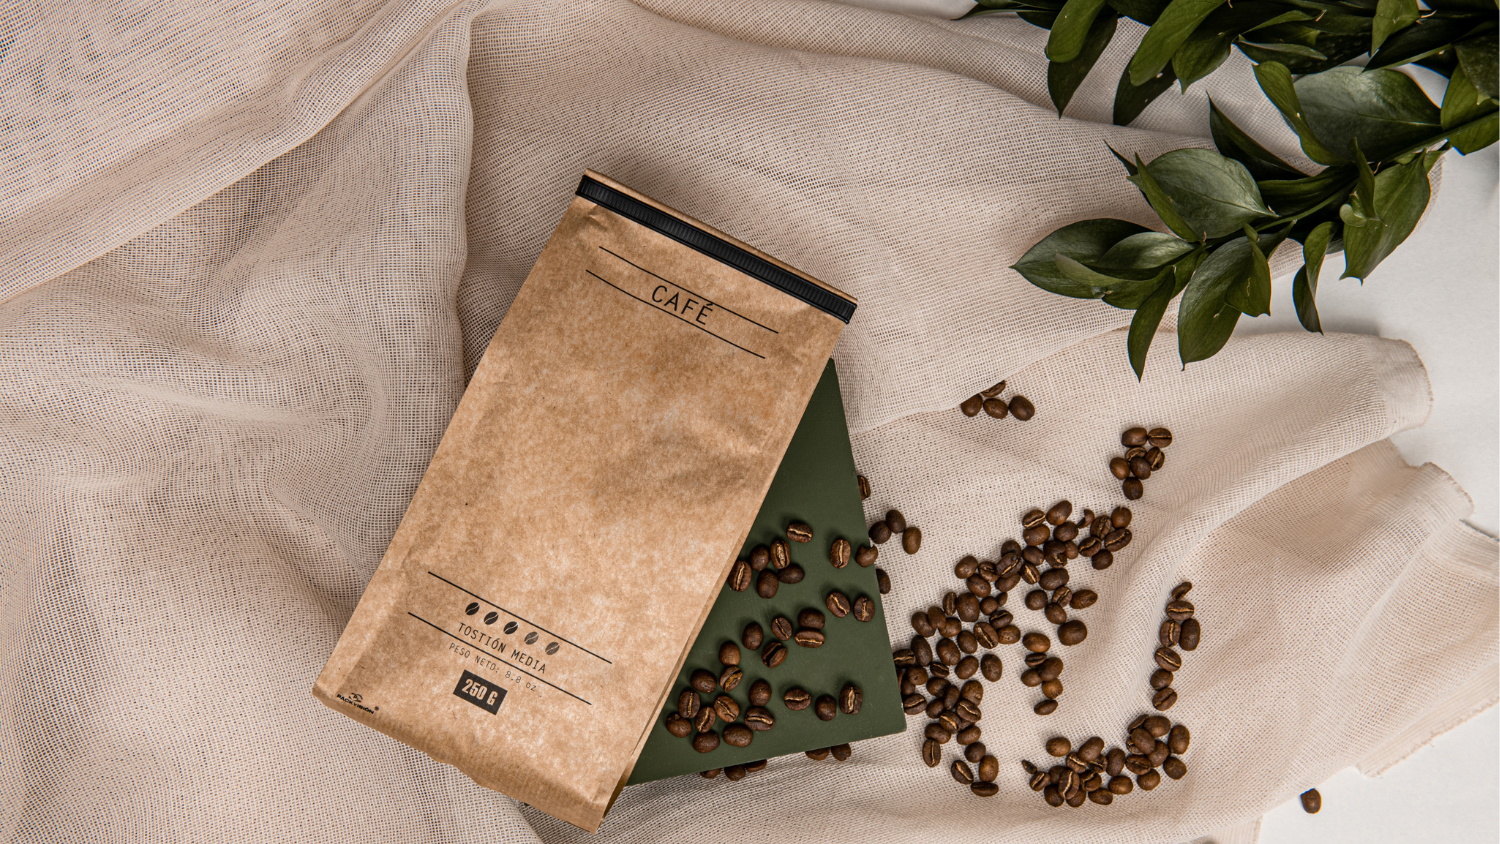 Crafting a brand story: The role of packaging in coffee and tea marketing